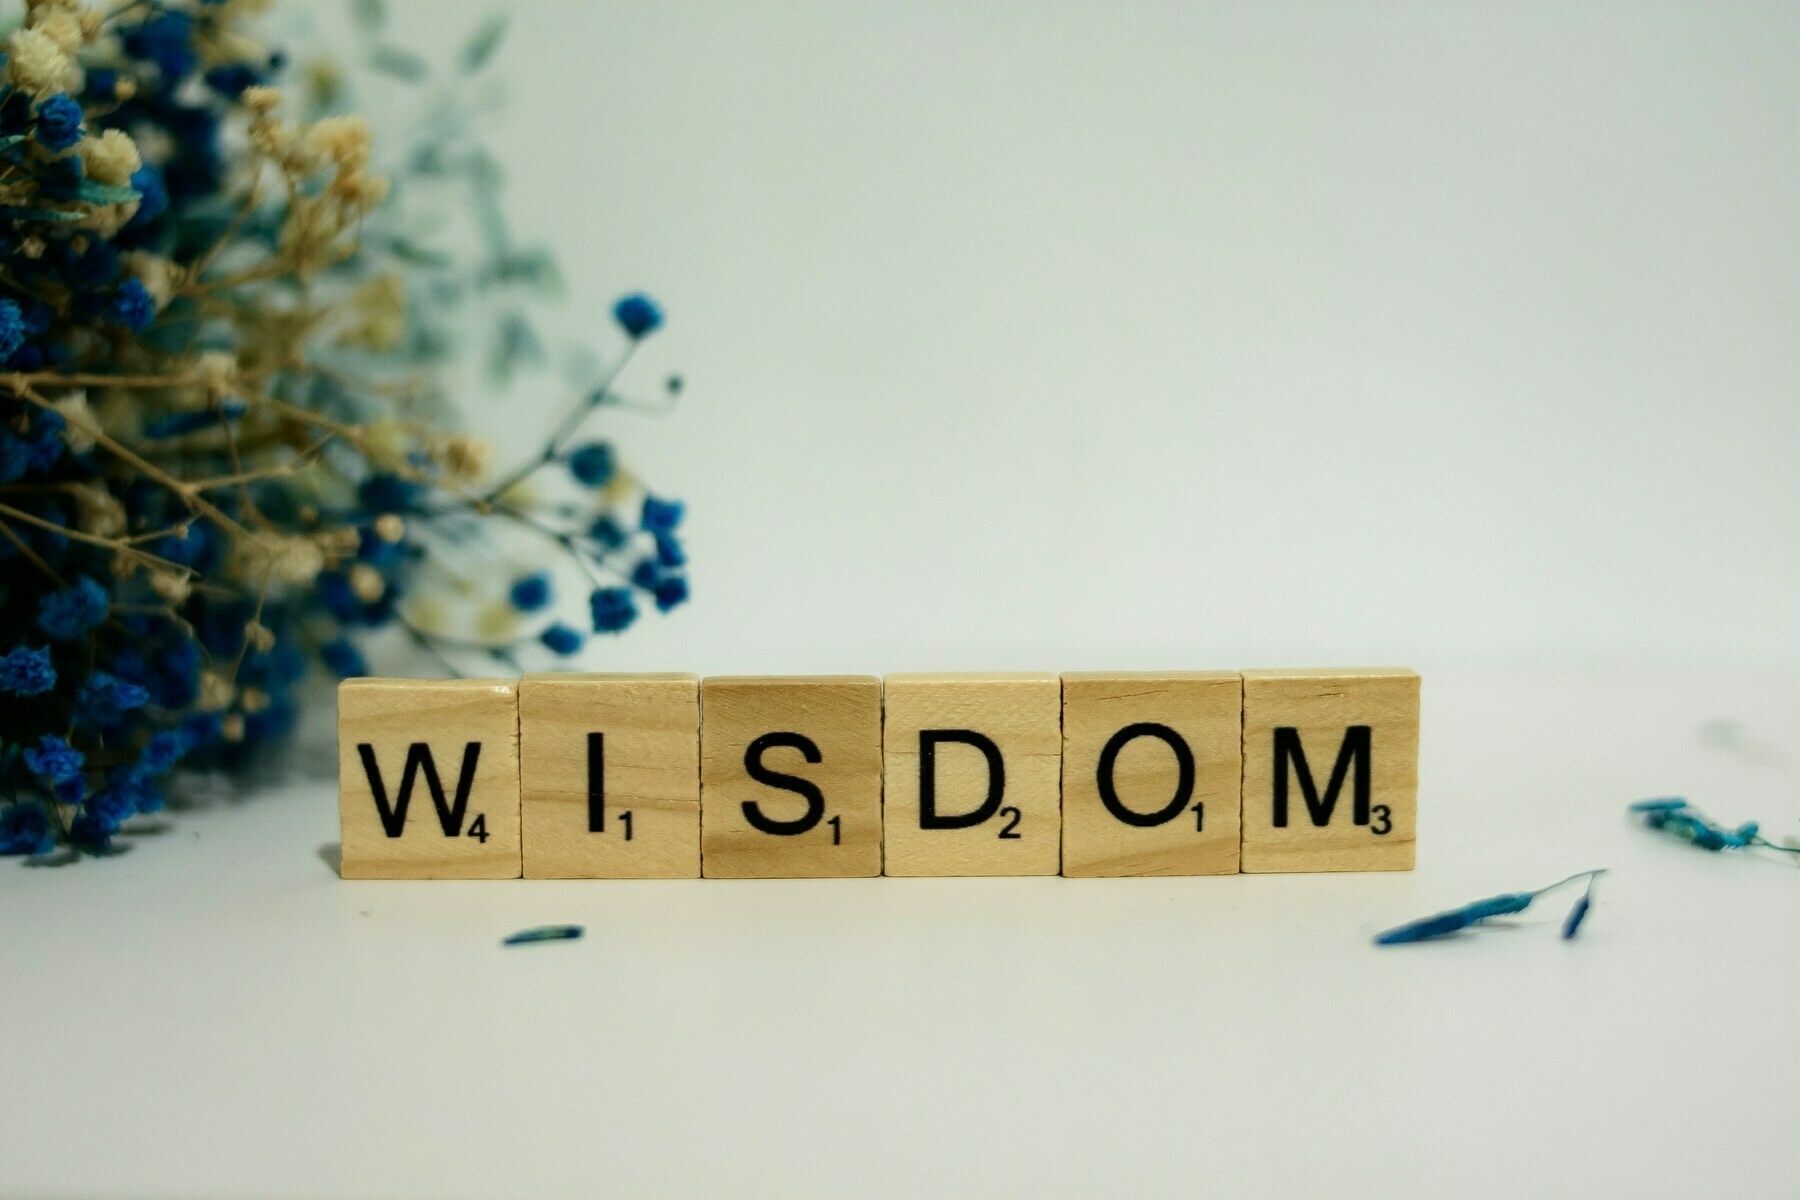 the word, 'wisdom' spelled out in scrabble tiles